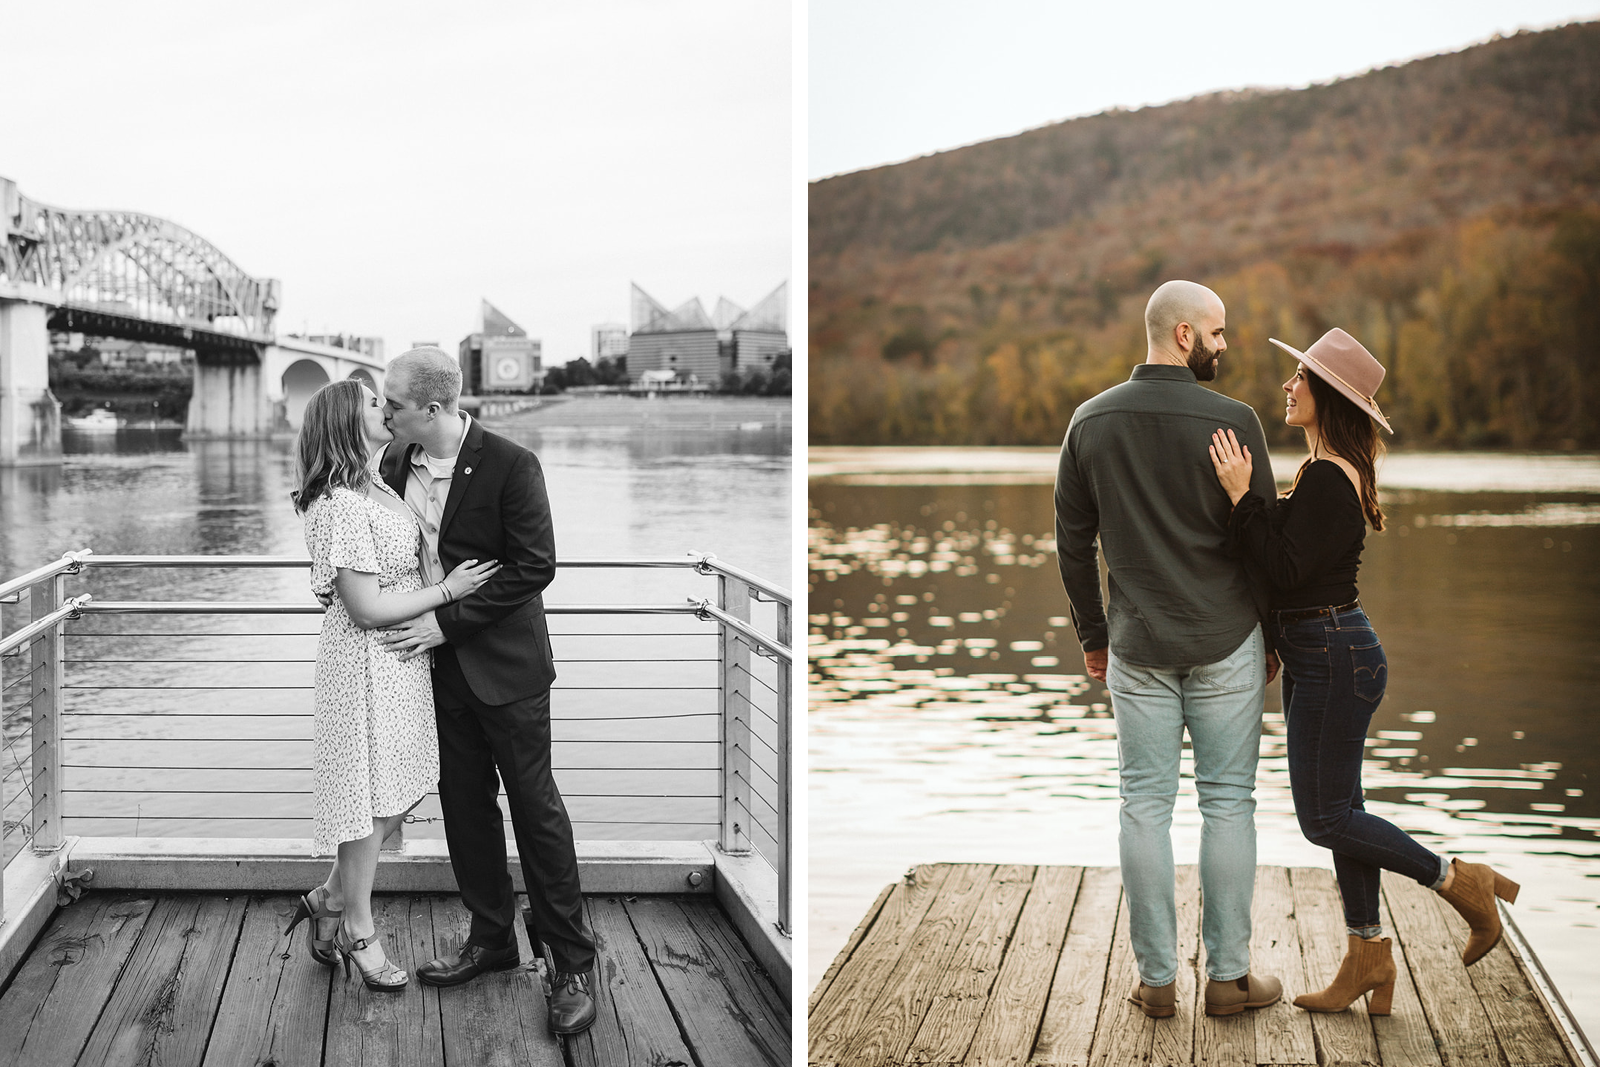 Two photos of couples embracing at the edge of wooden docks.